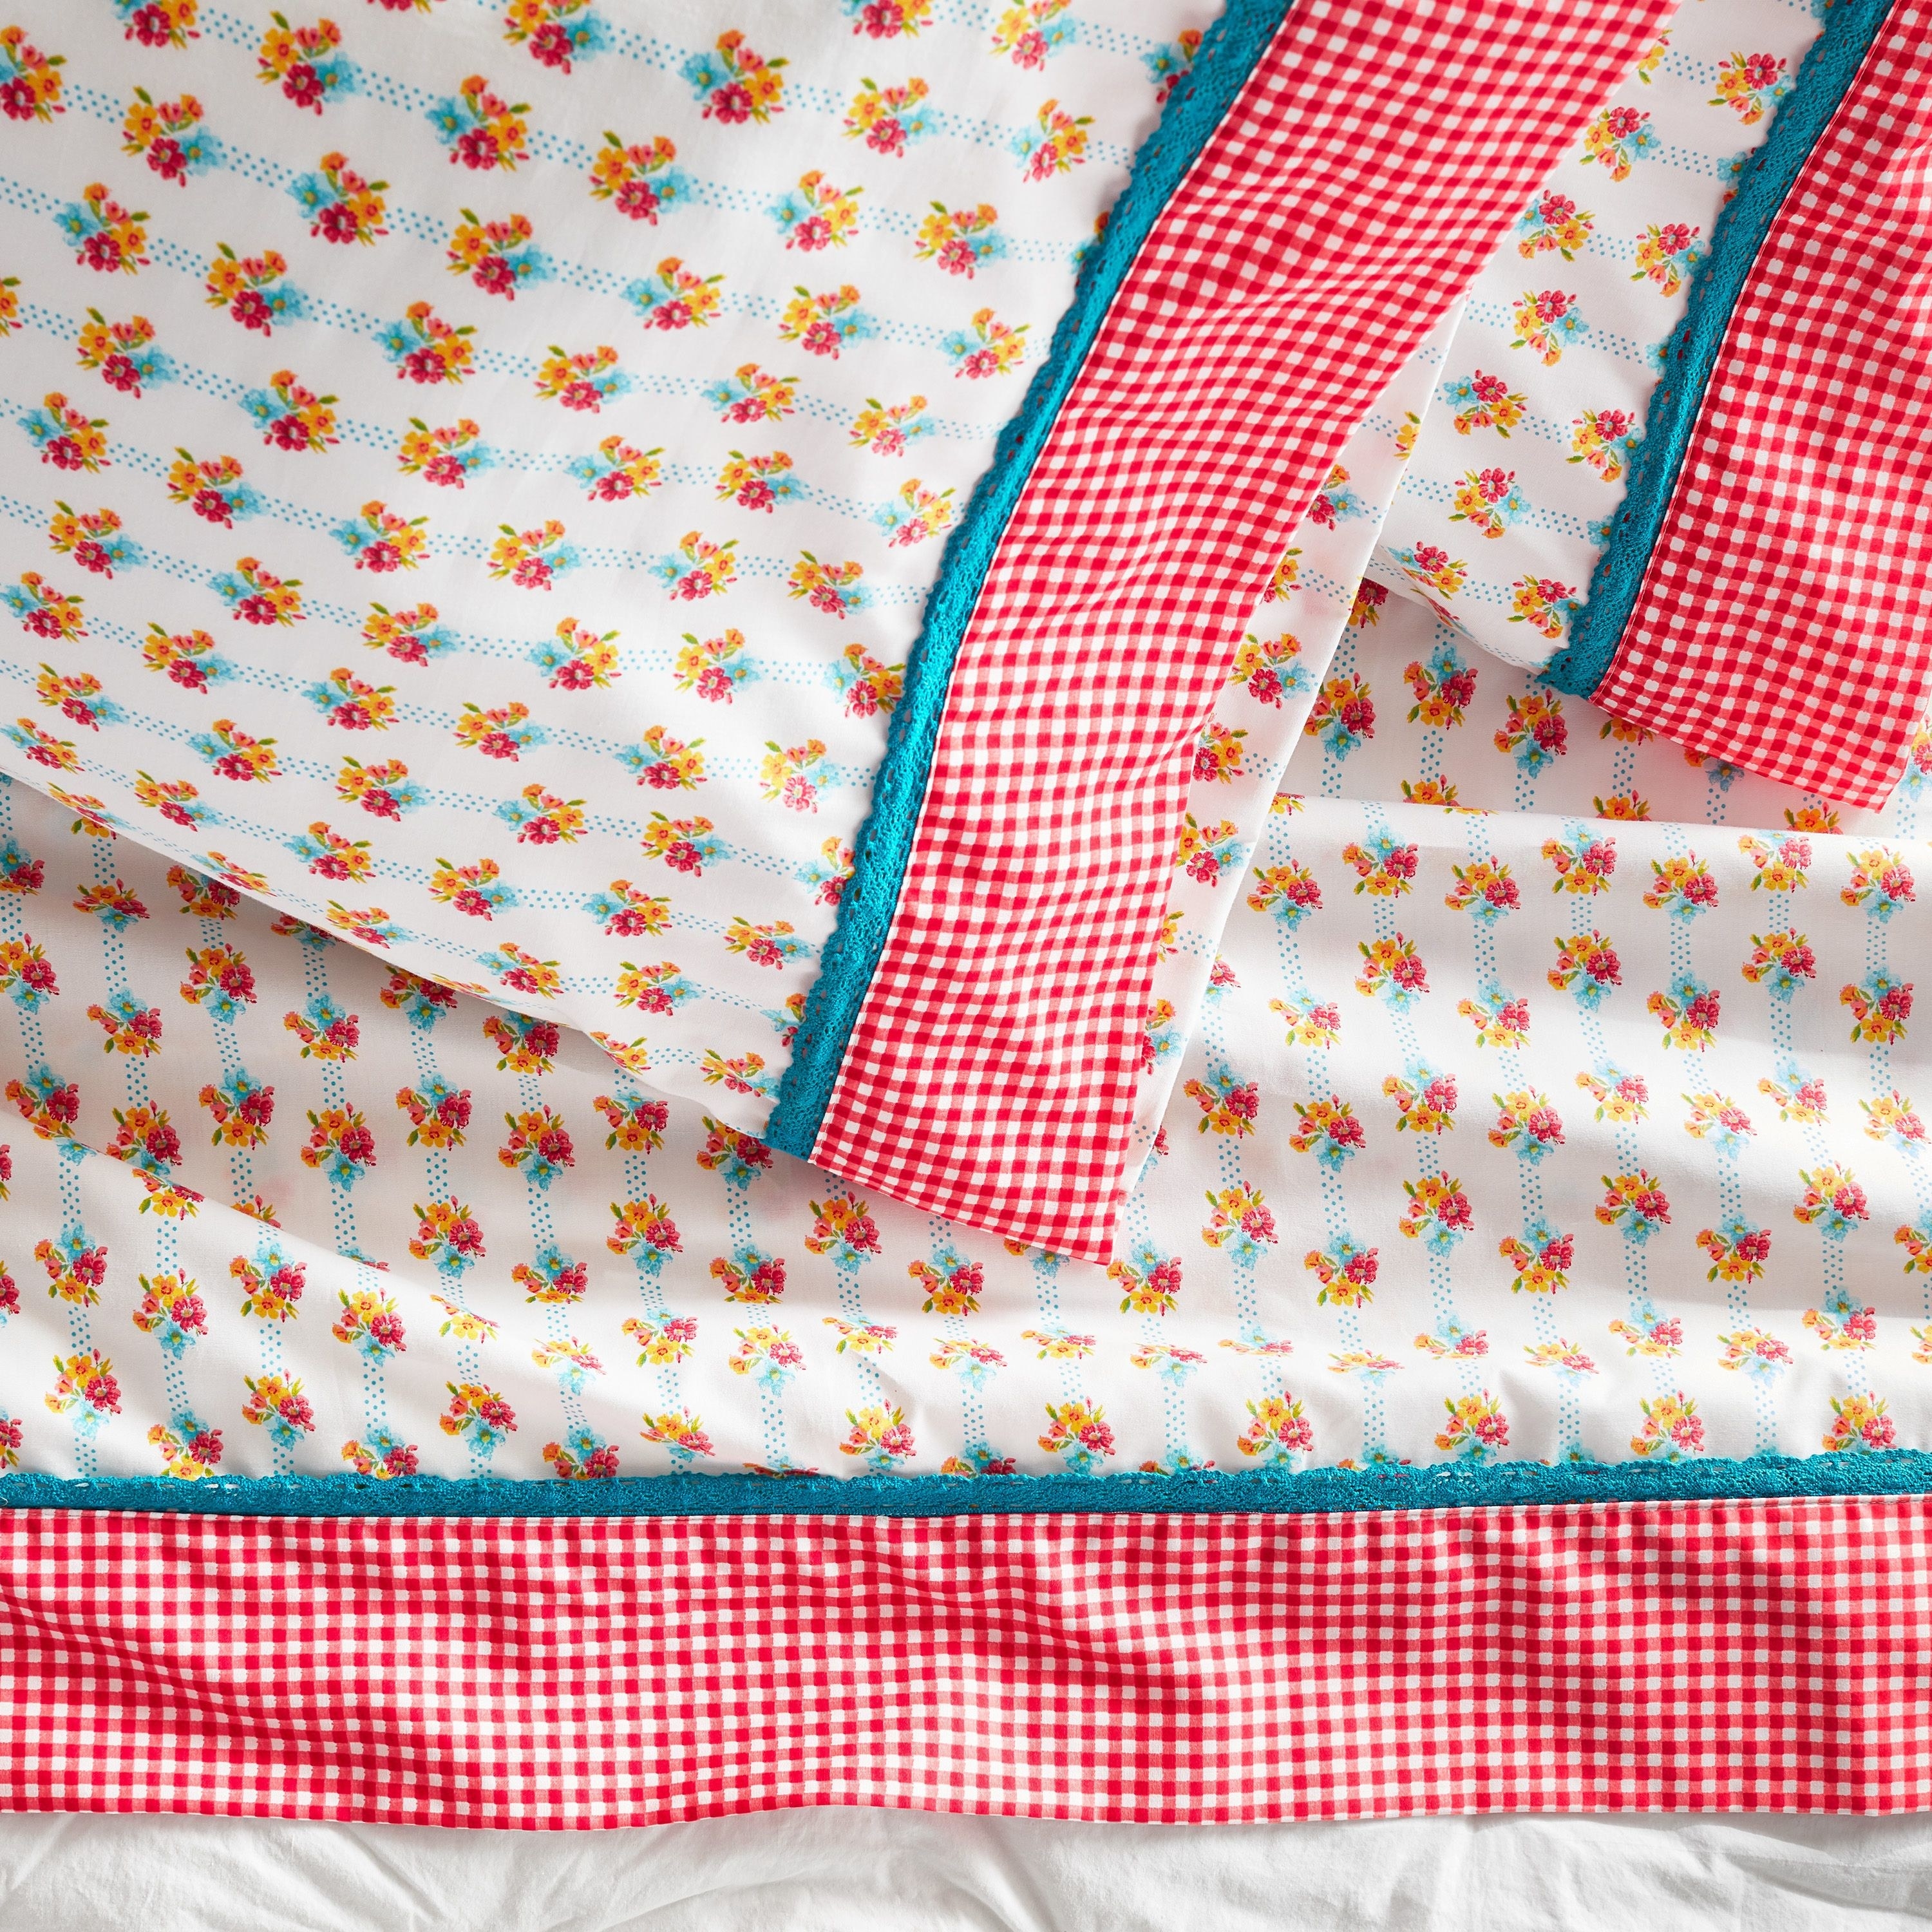 the multicolored floral and gingham sheets